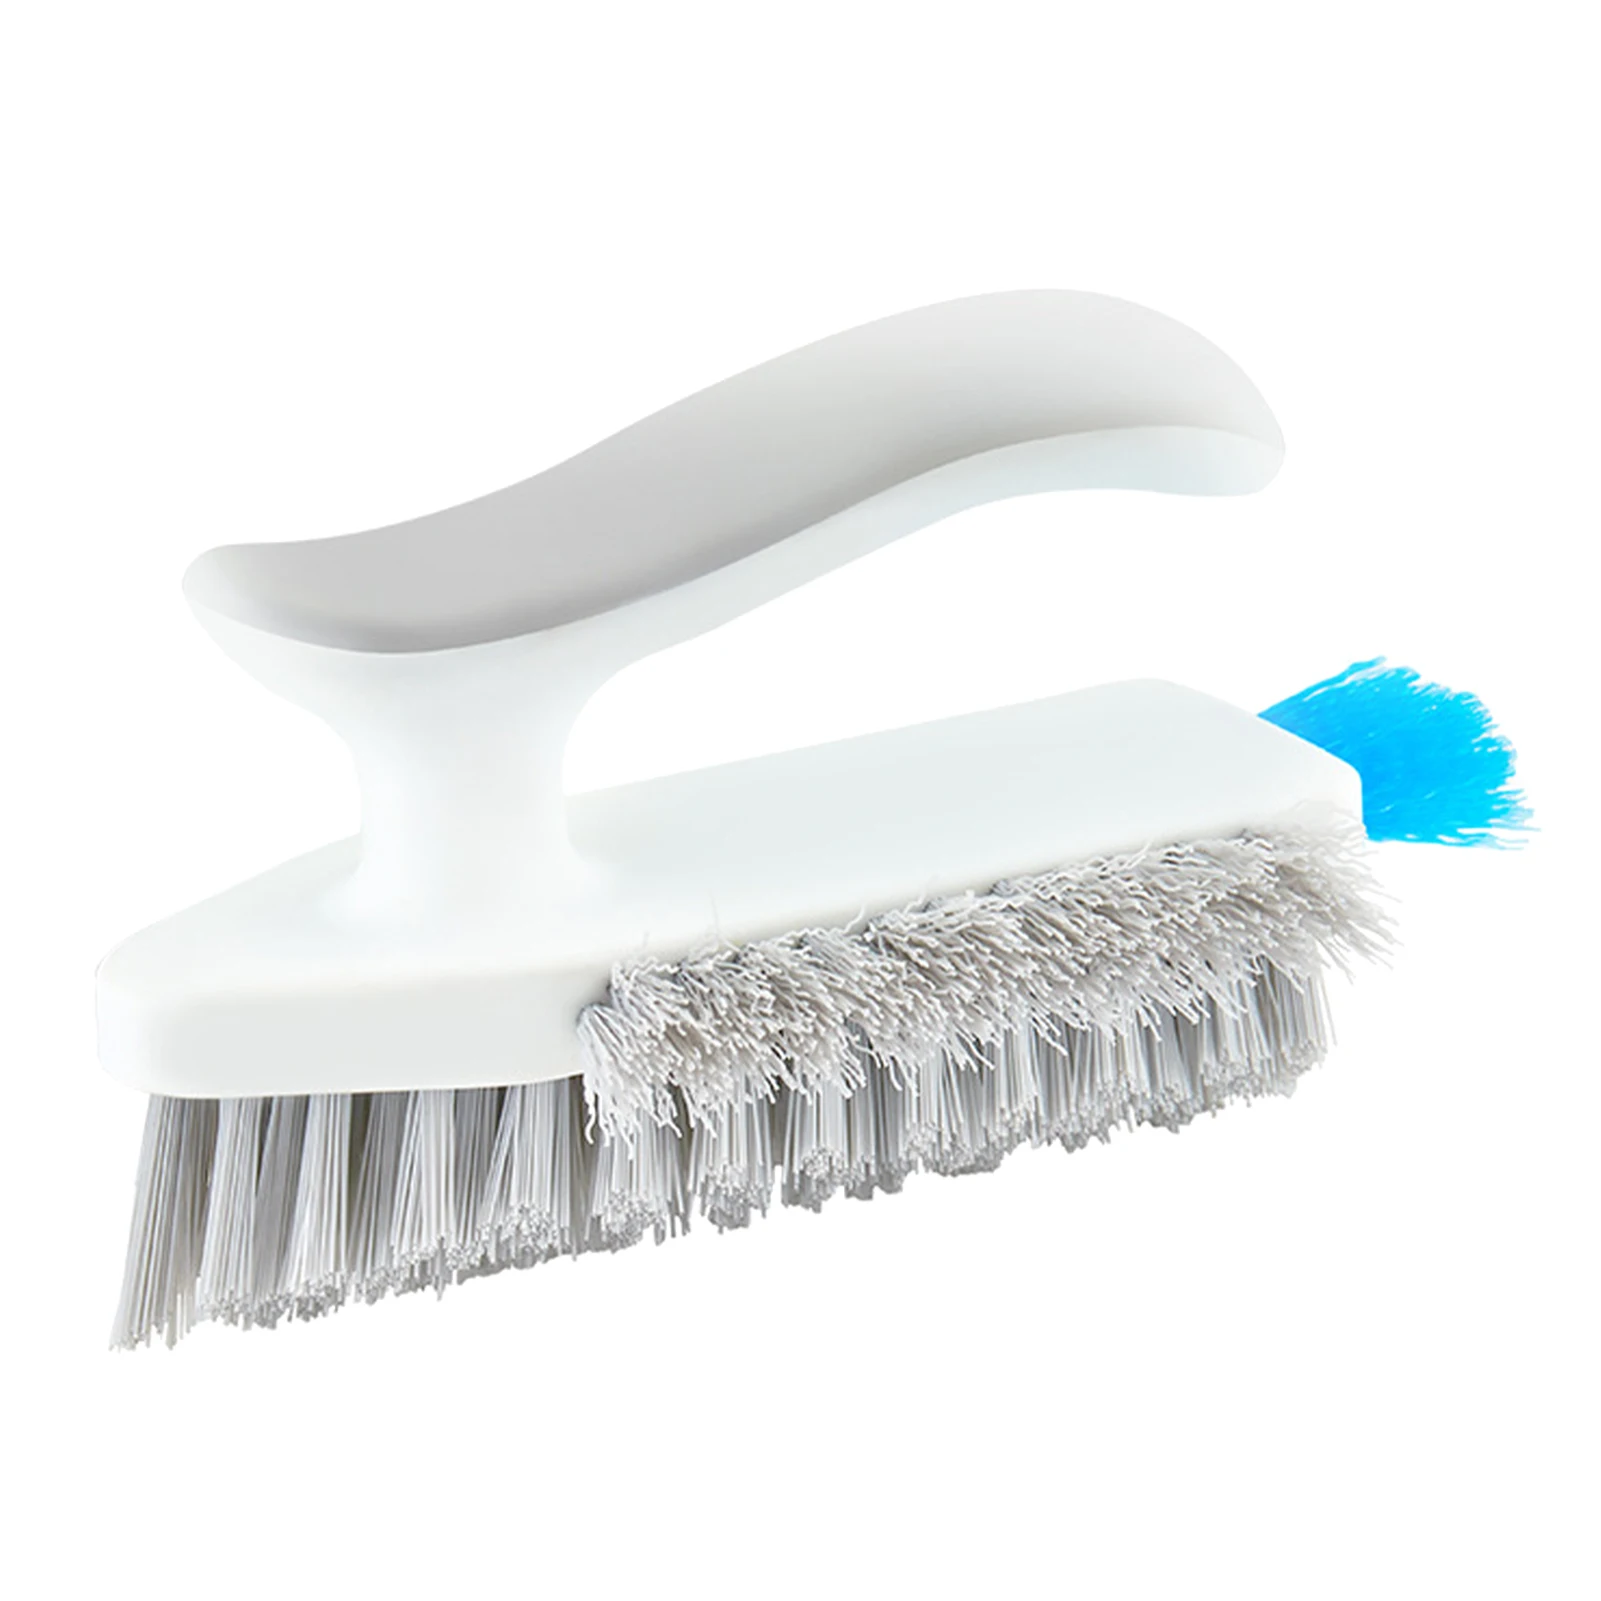 

4 In 1 Corner Scrubbing Cleaning Brush Household Tool Durable With Handle Plastic Windshield Wiper Easy Grip Stiff Bristles